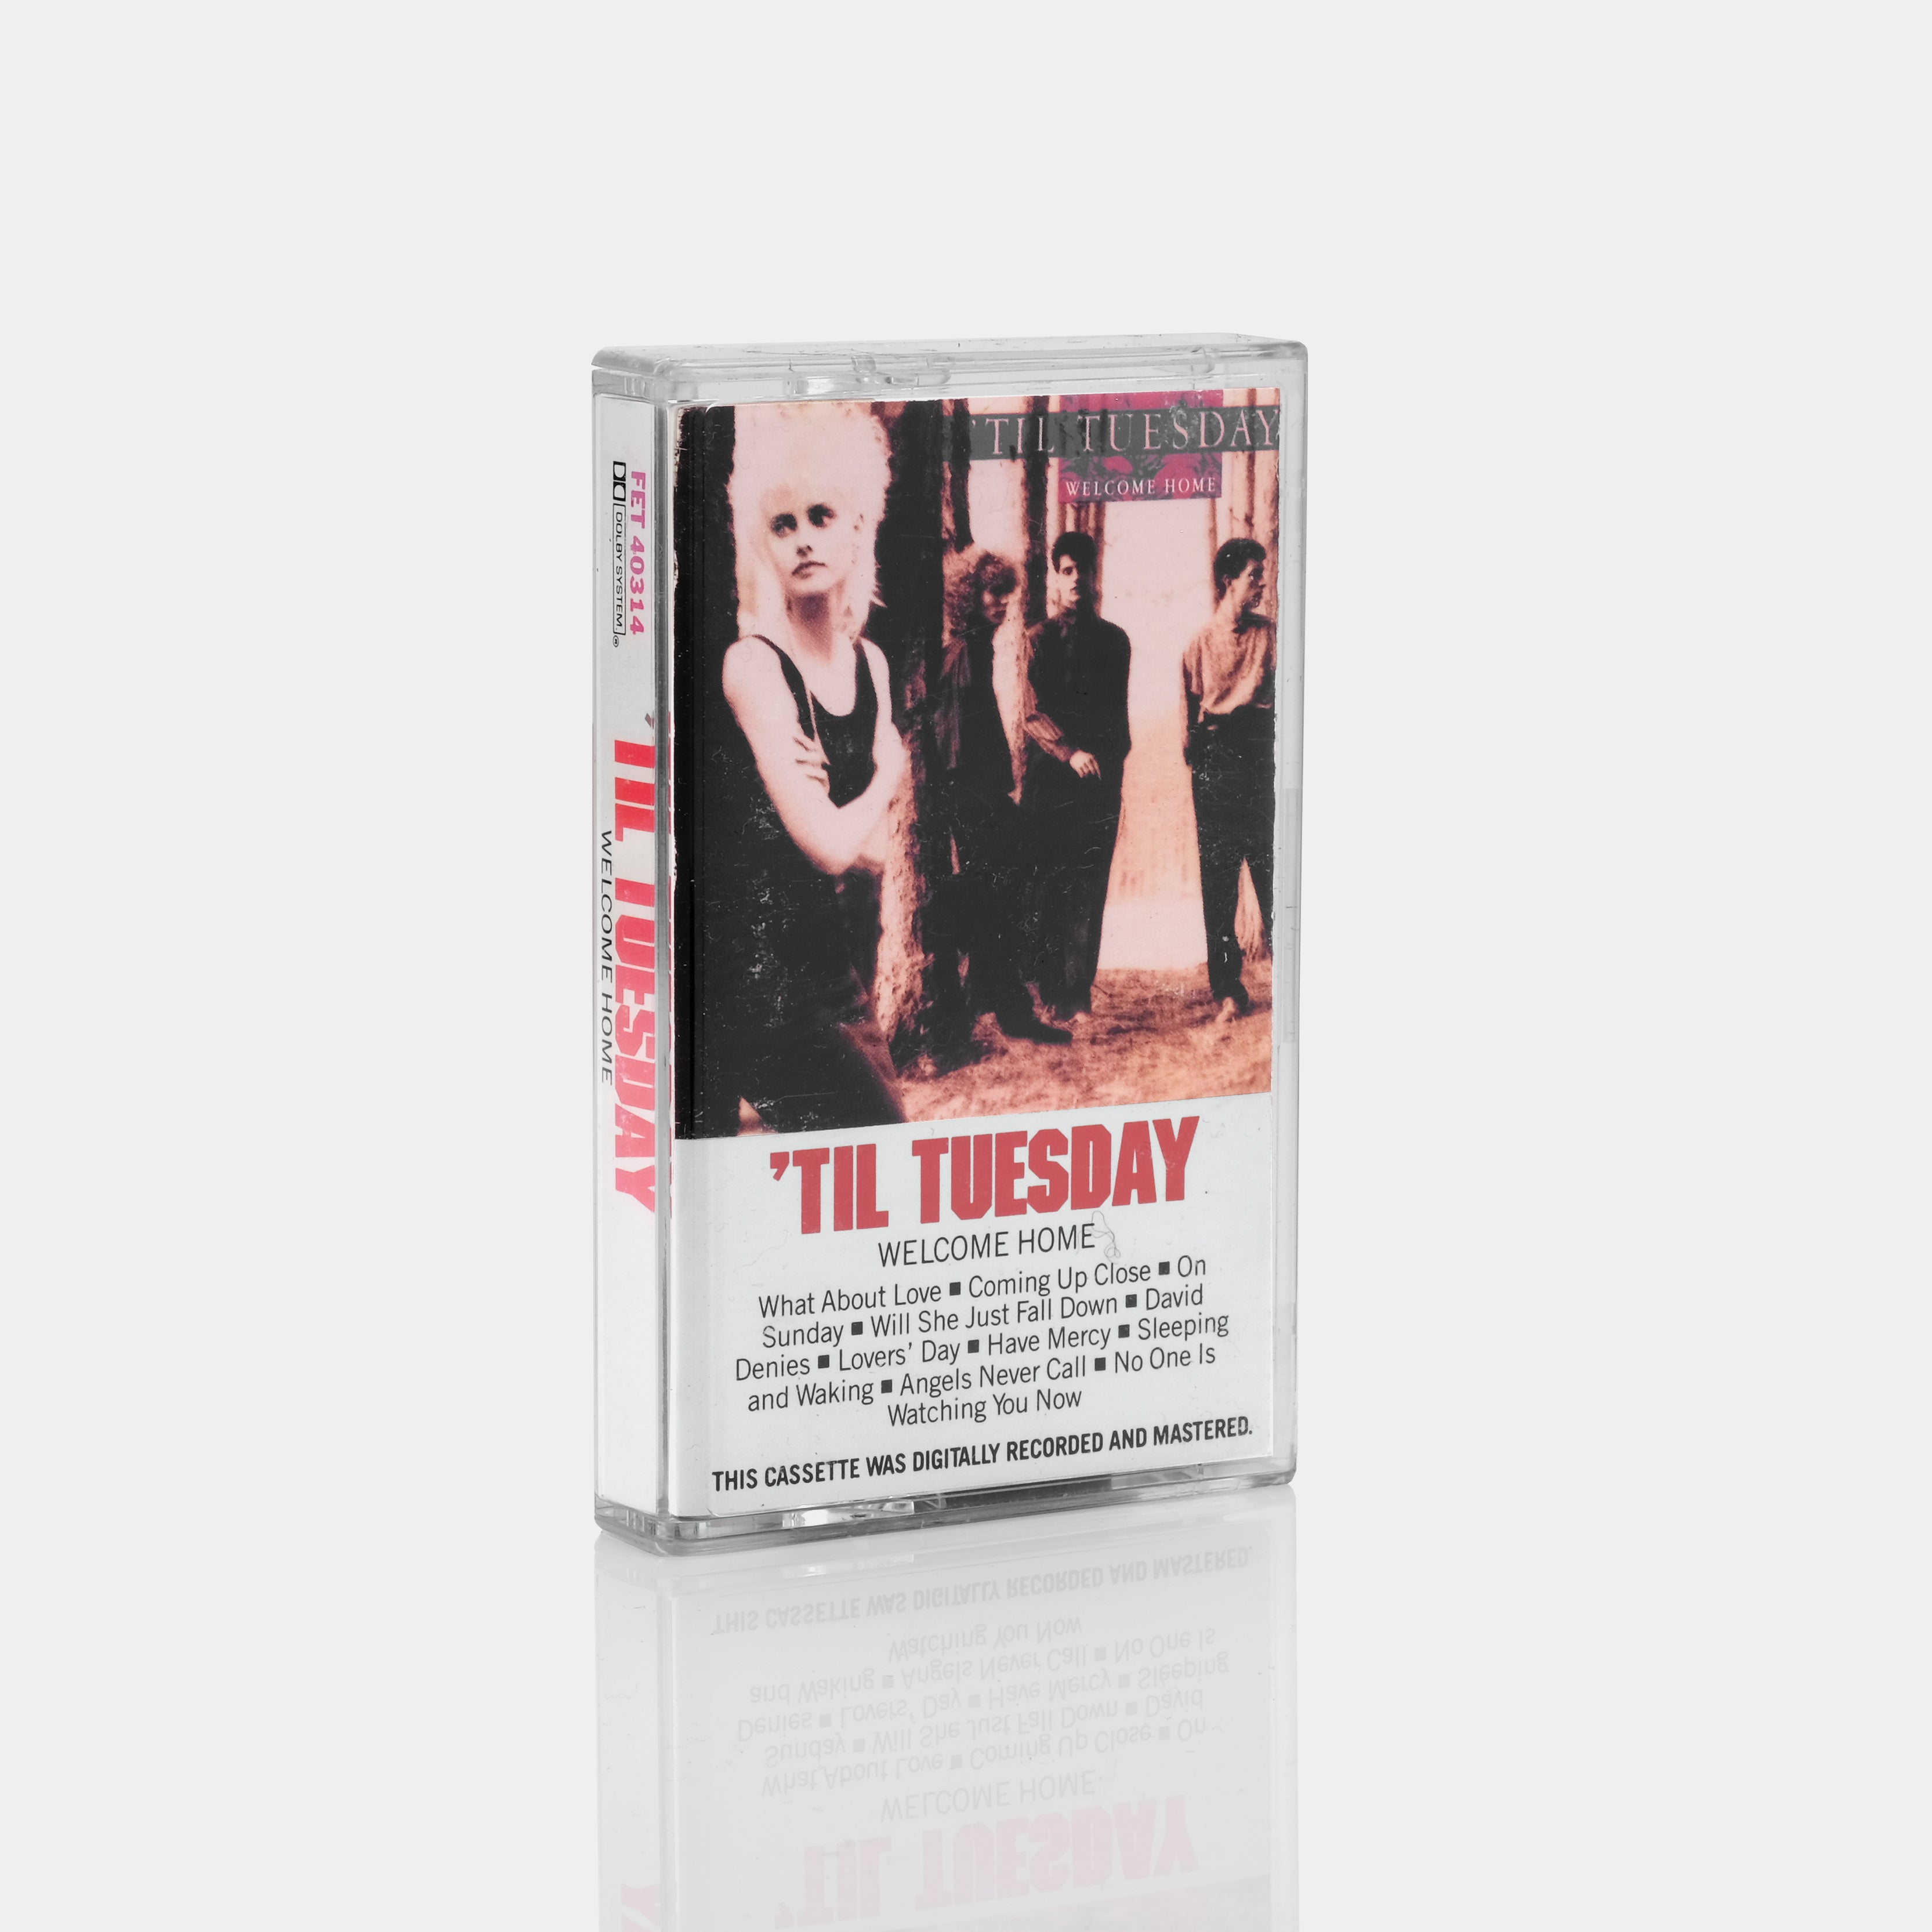 'Til Tuesday - Welcome Home Cassette Tape